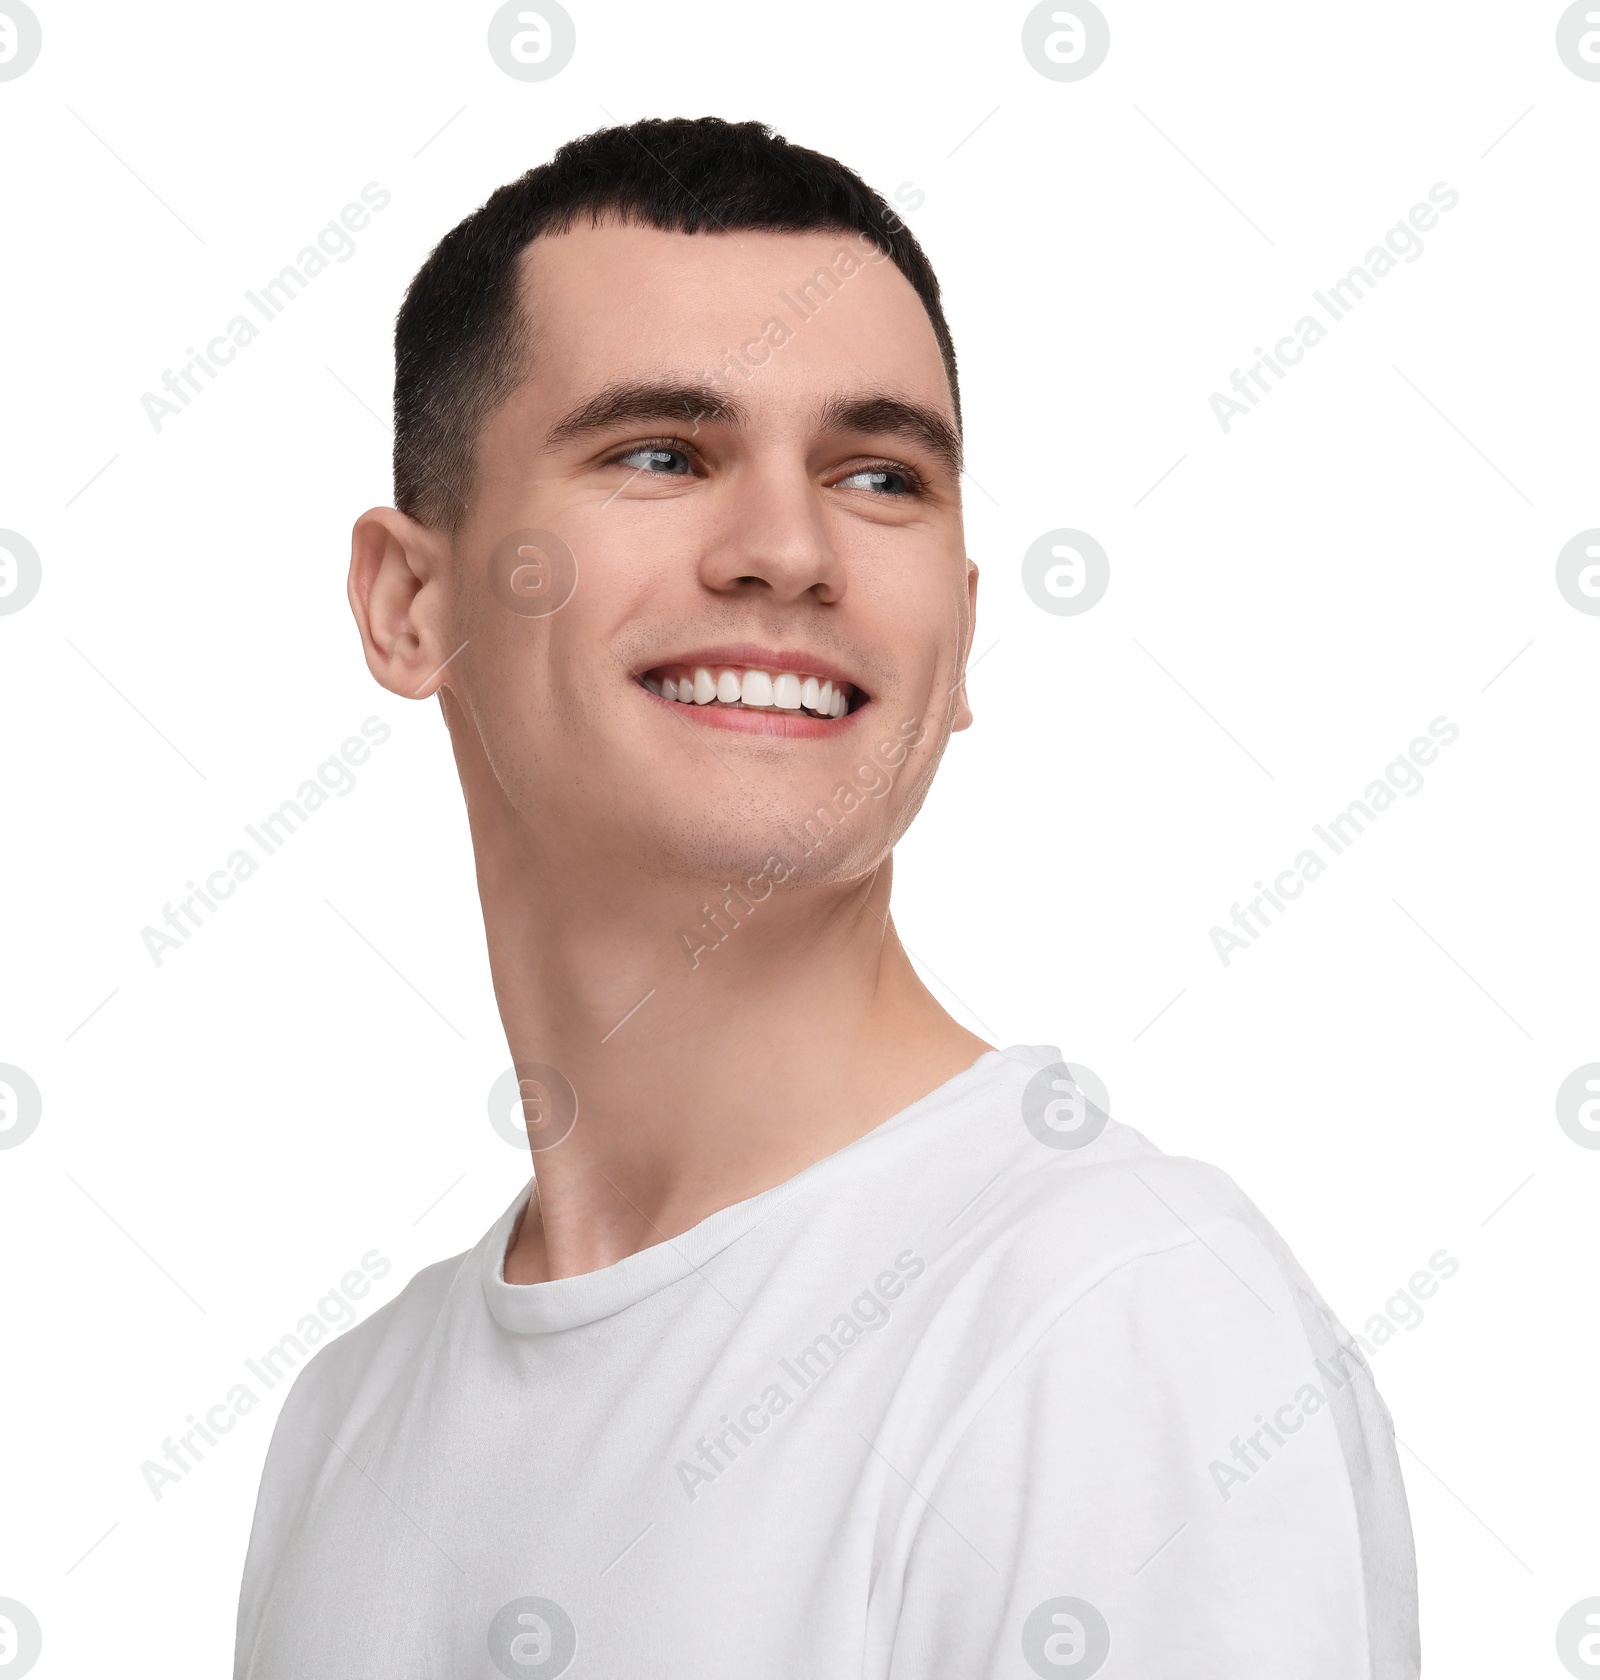 Photo of Handsome young man with clean teeth smiling on white background